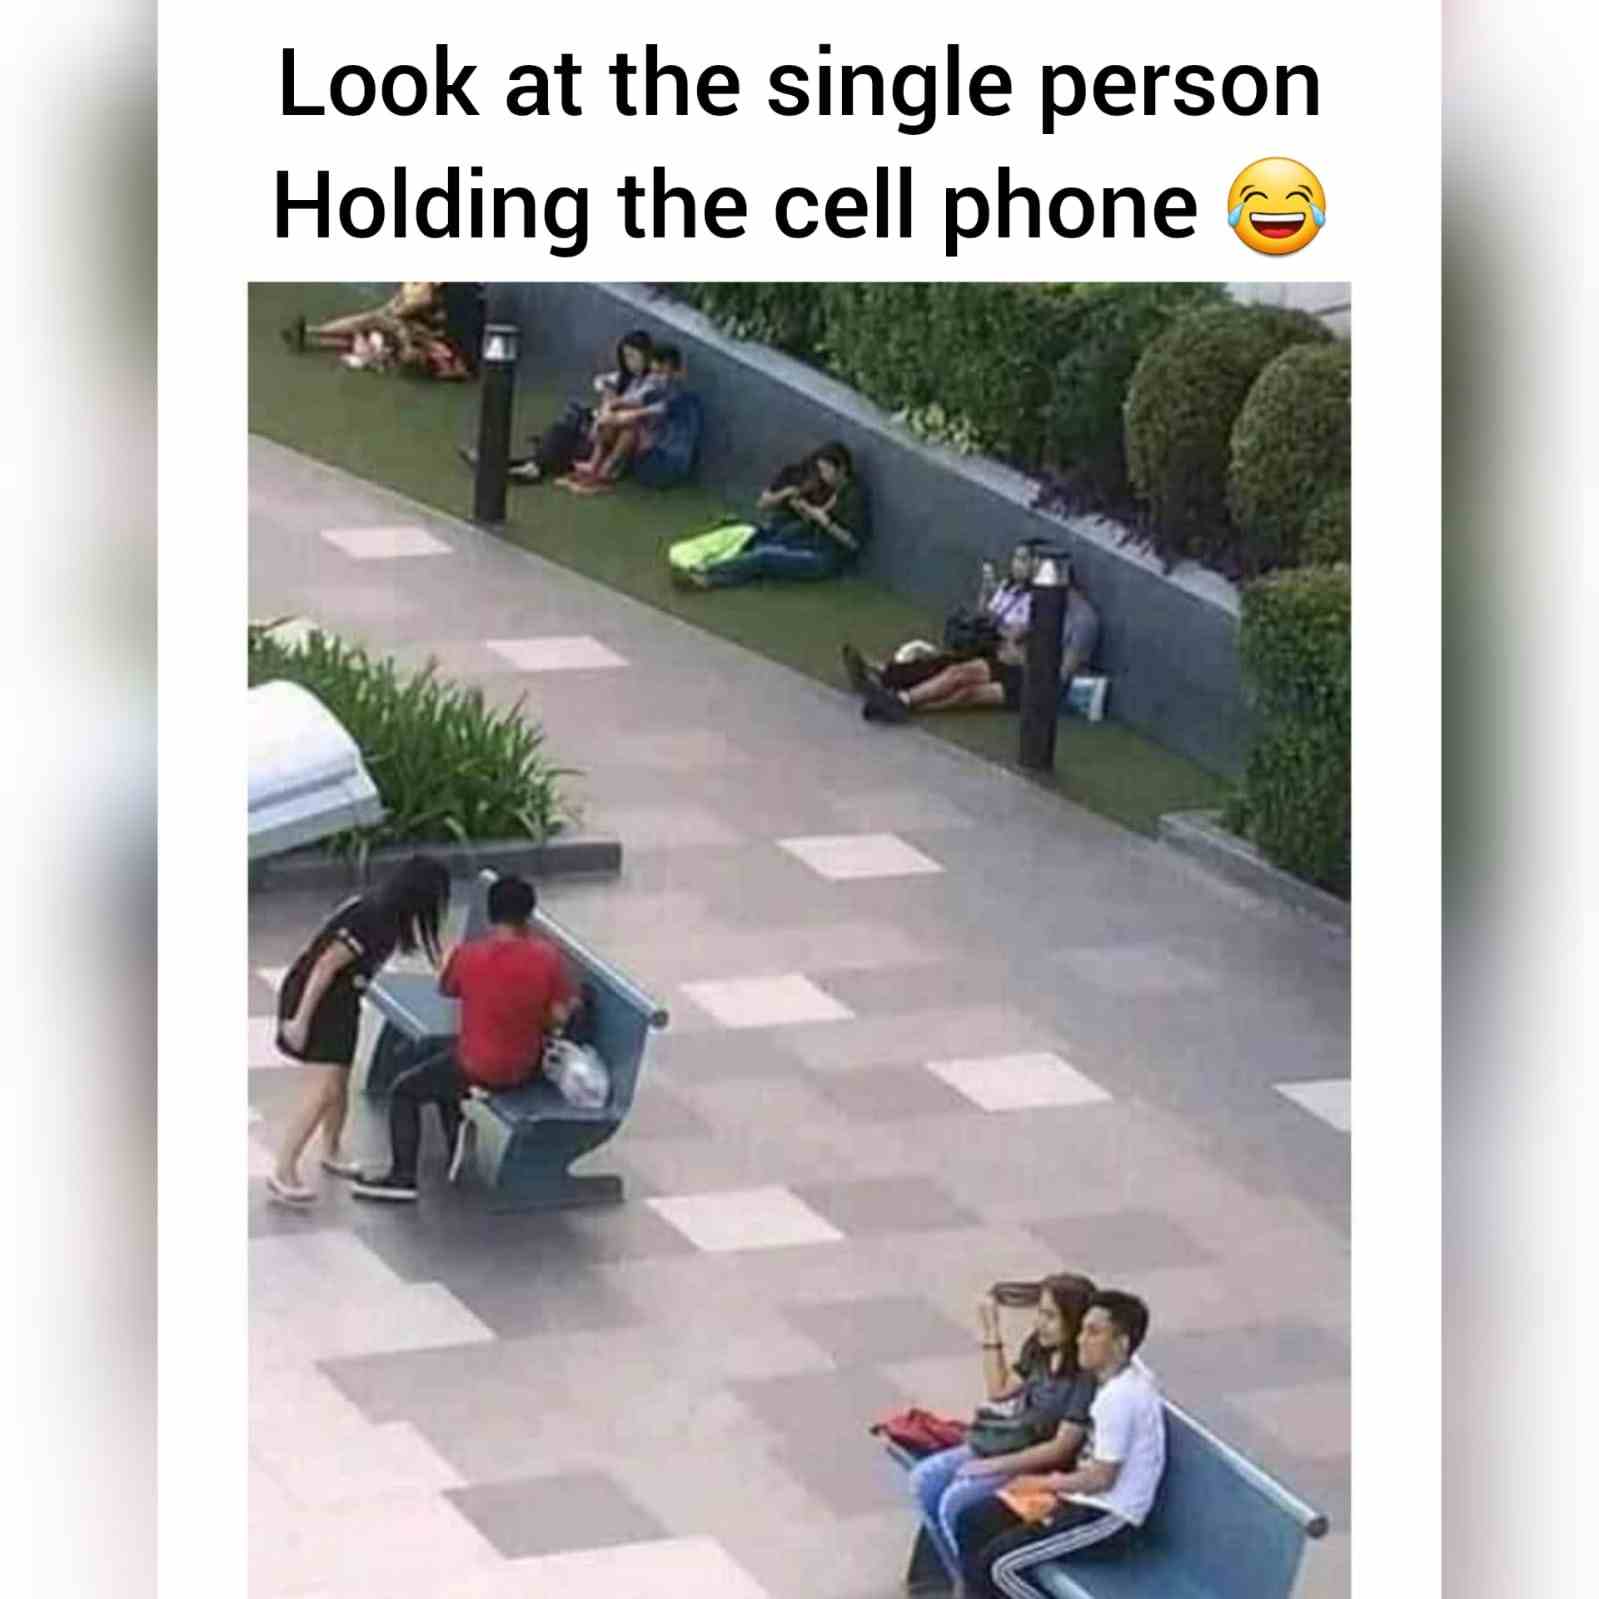 Look at the single person holding the cell phone